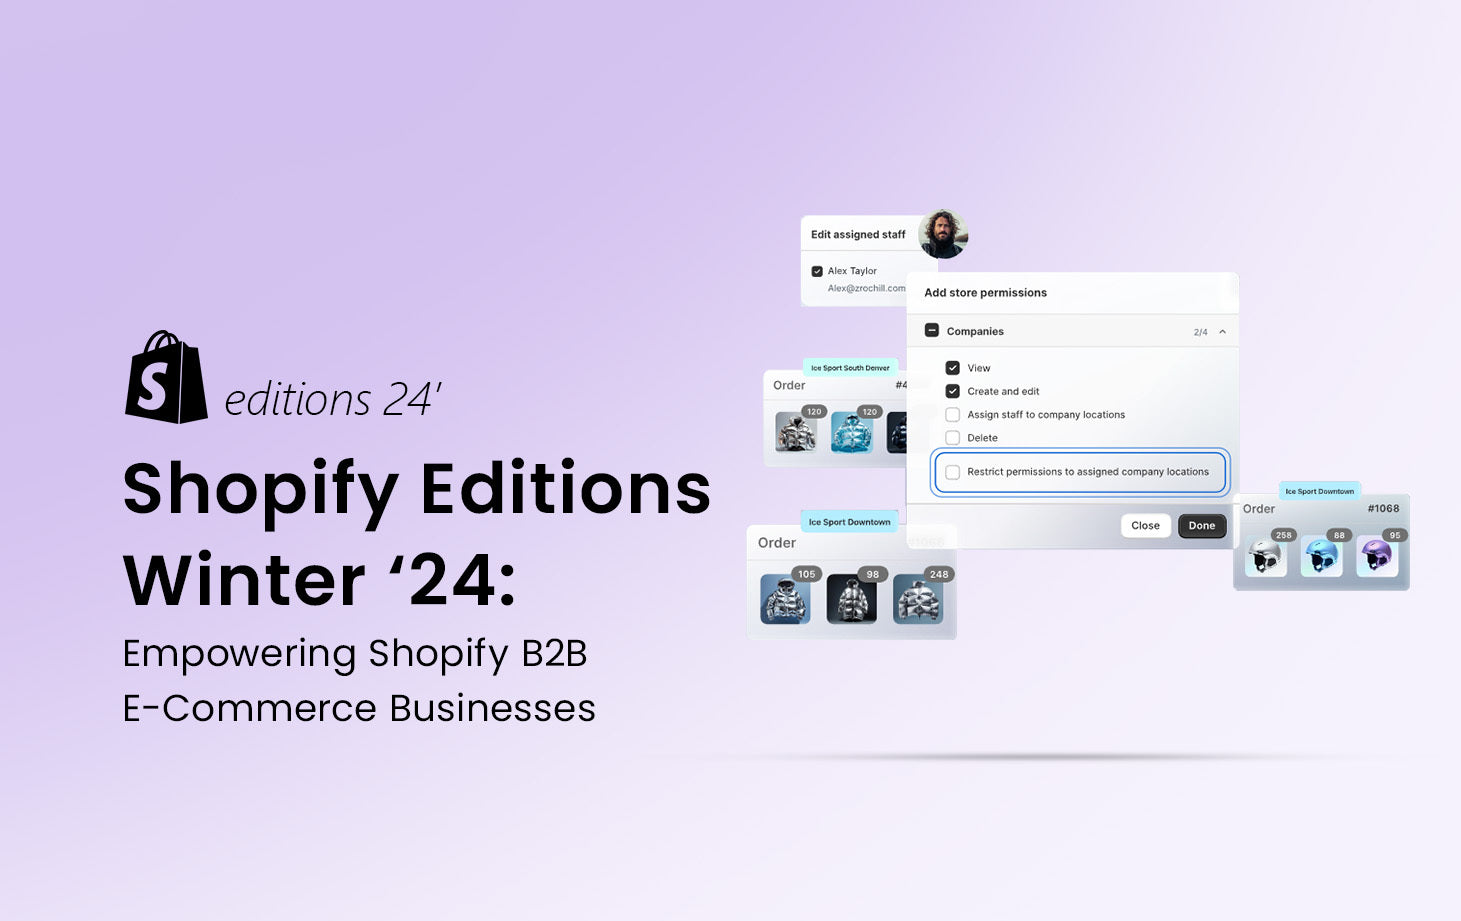 Shopify Editions Winter ‘24: Empowering Shopify B2B E-Commerce Businesses